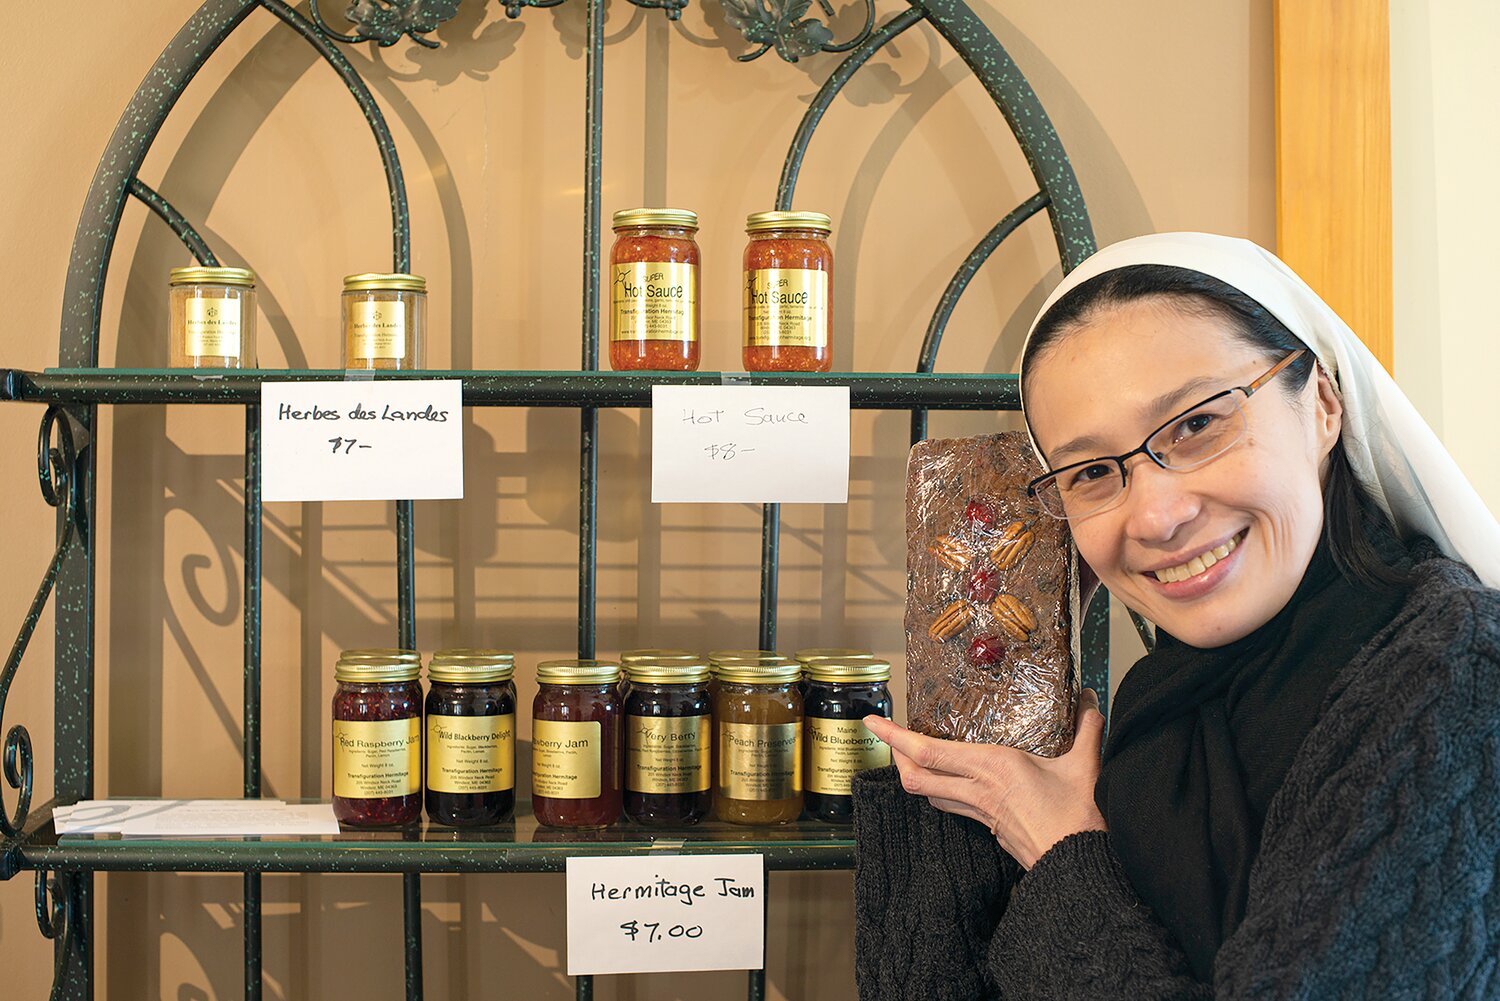 Transfiguration Hermitage in Windsor is a monastic community following the Rule of St. Benedict. Dedicated to a life of prayer, the religious sisters, Sister Anastasia pictured here, also produce the finest quality fruitcakes, baked goods, and jams, which they sell by mail order, online, at the hermitage, and at local farmers’ markets.